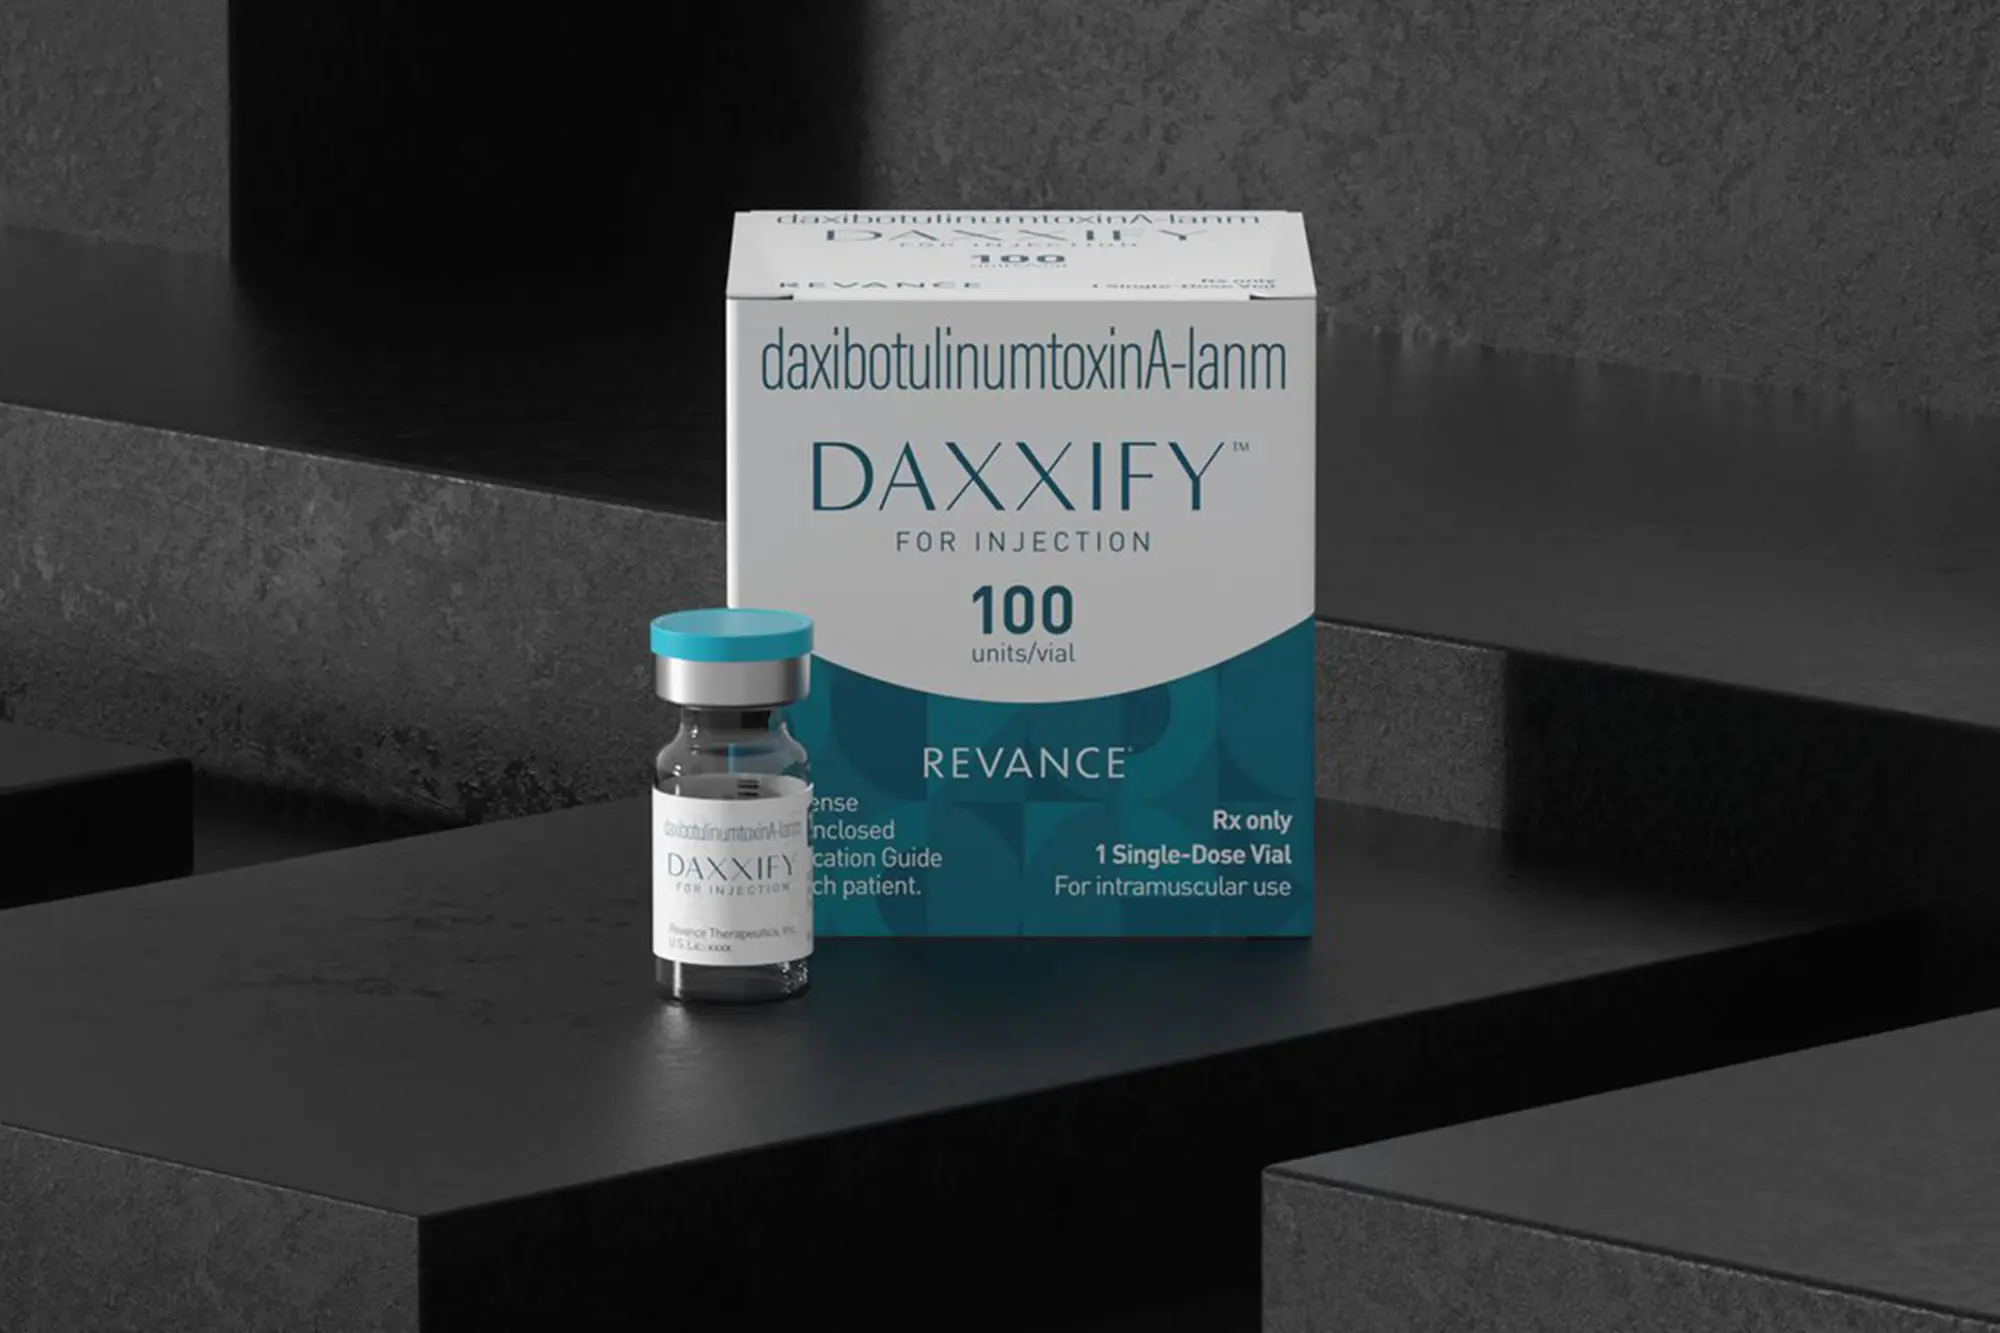 daxxify bottle on a ceramic surface